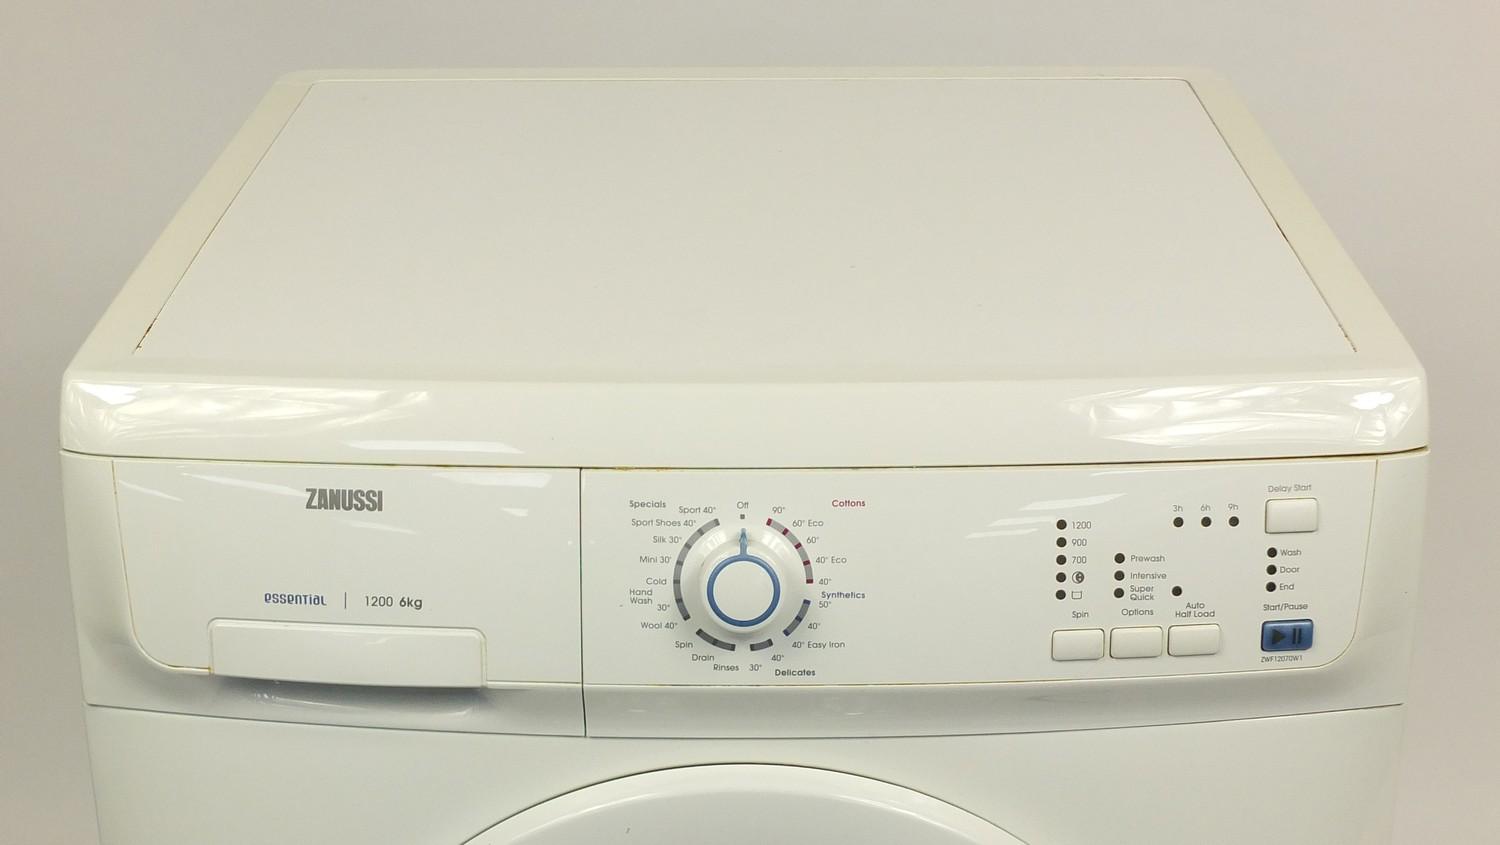 Zanussi Essential 1200 6kg washing machine : For Further Condition Reports Please Visit Our Website, - Image 2 of 4